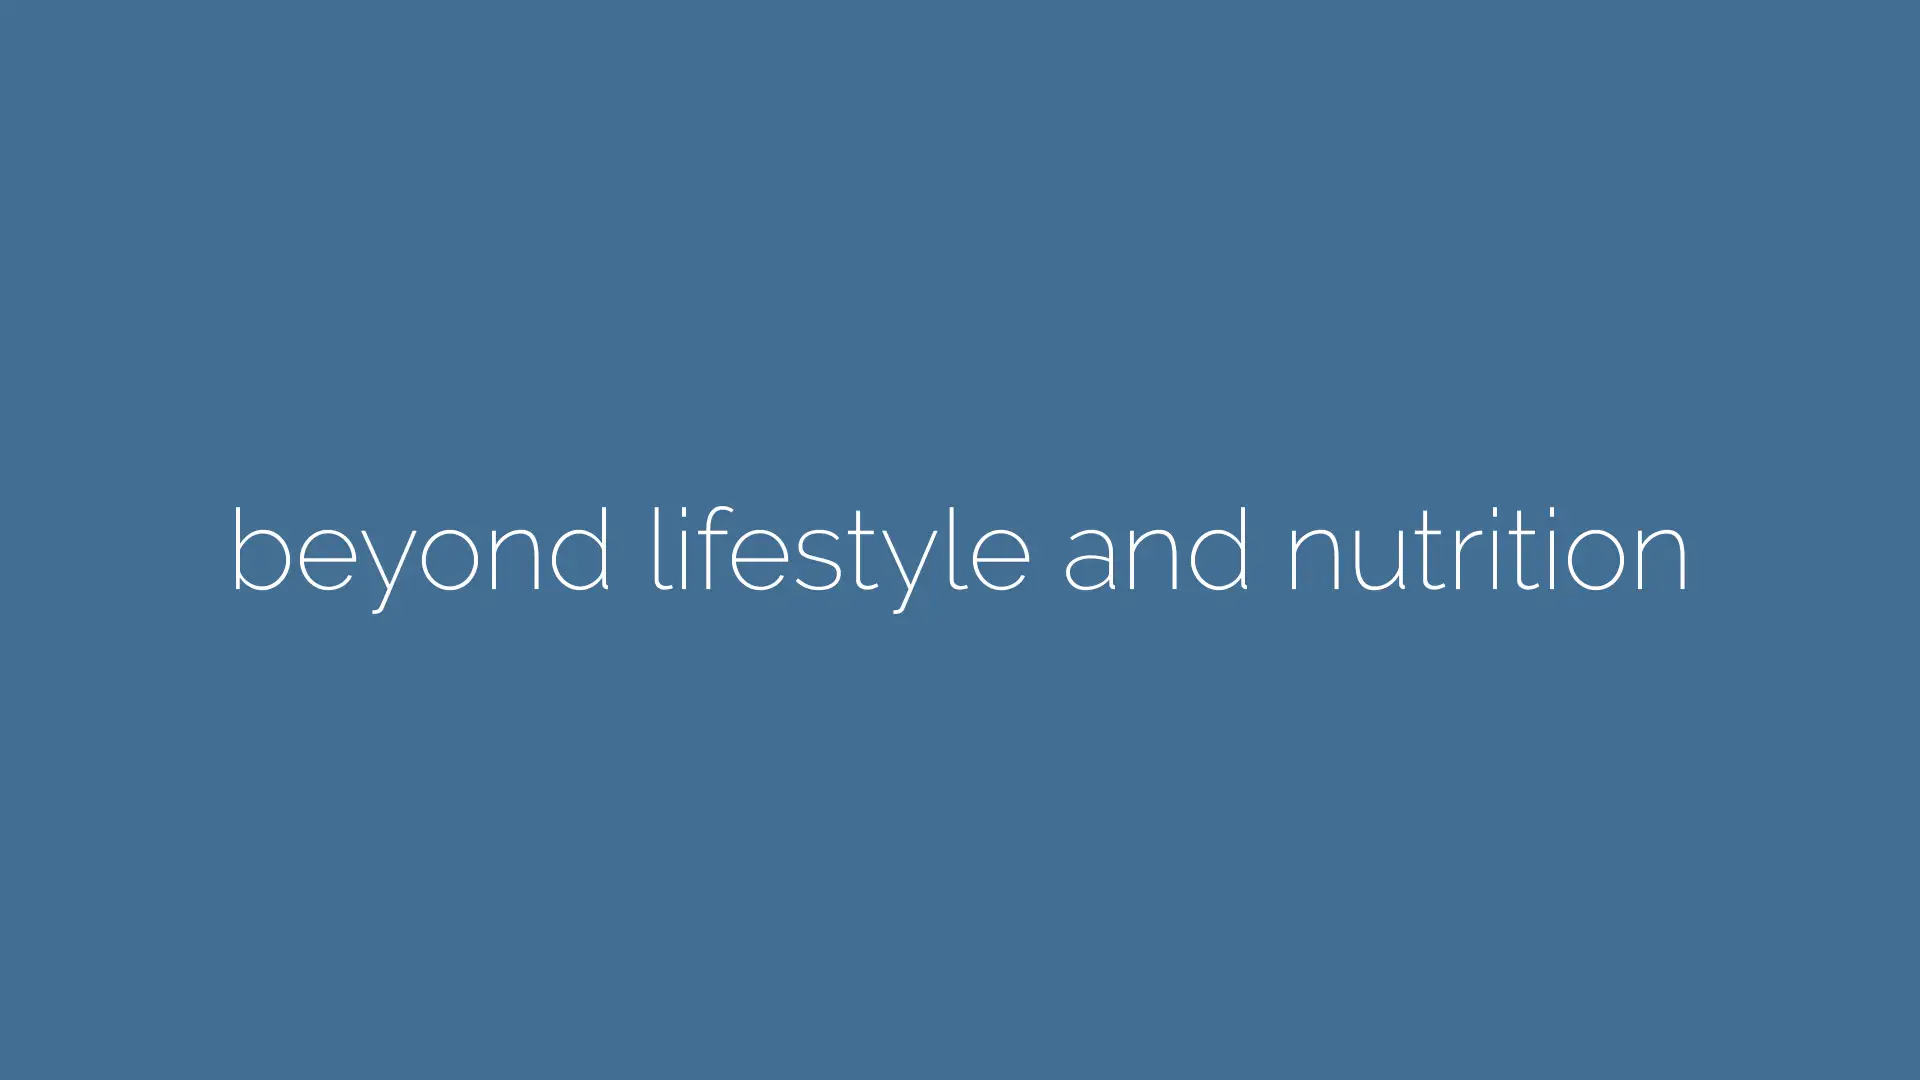 Featured image for “beyond nutrition & lifestyle”